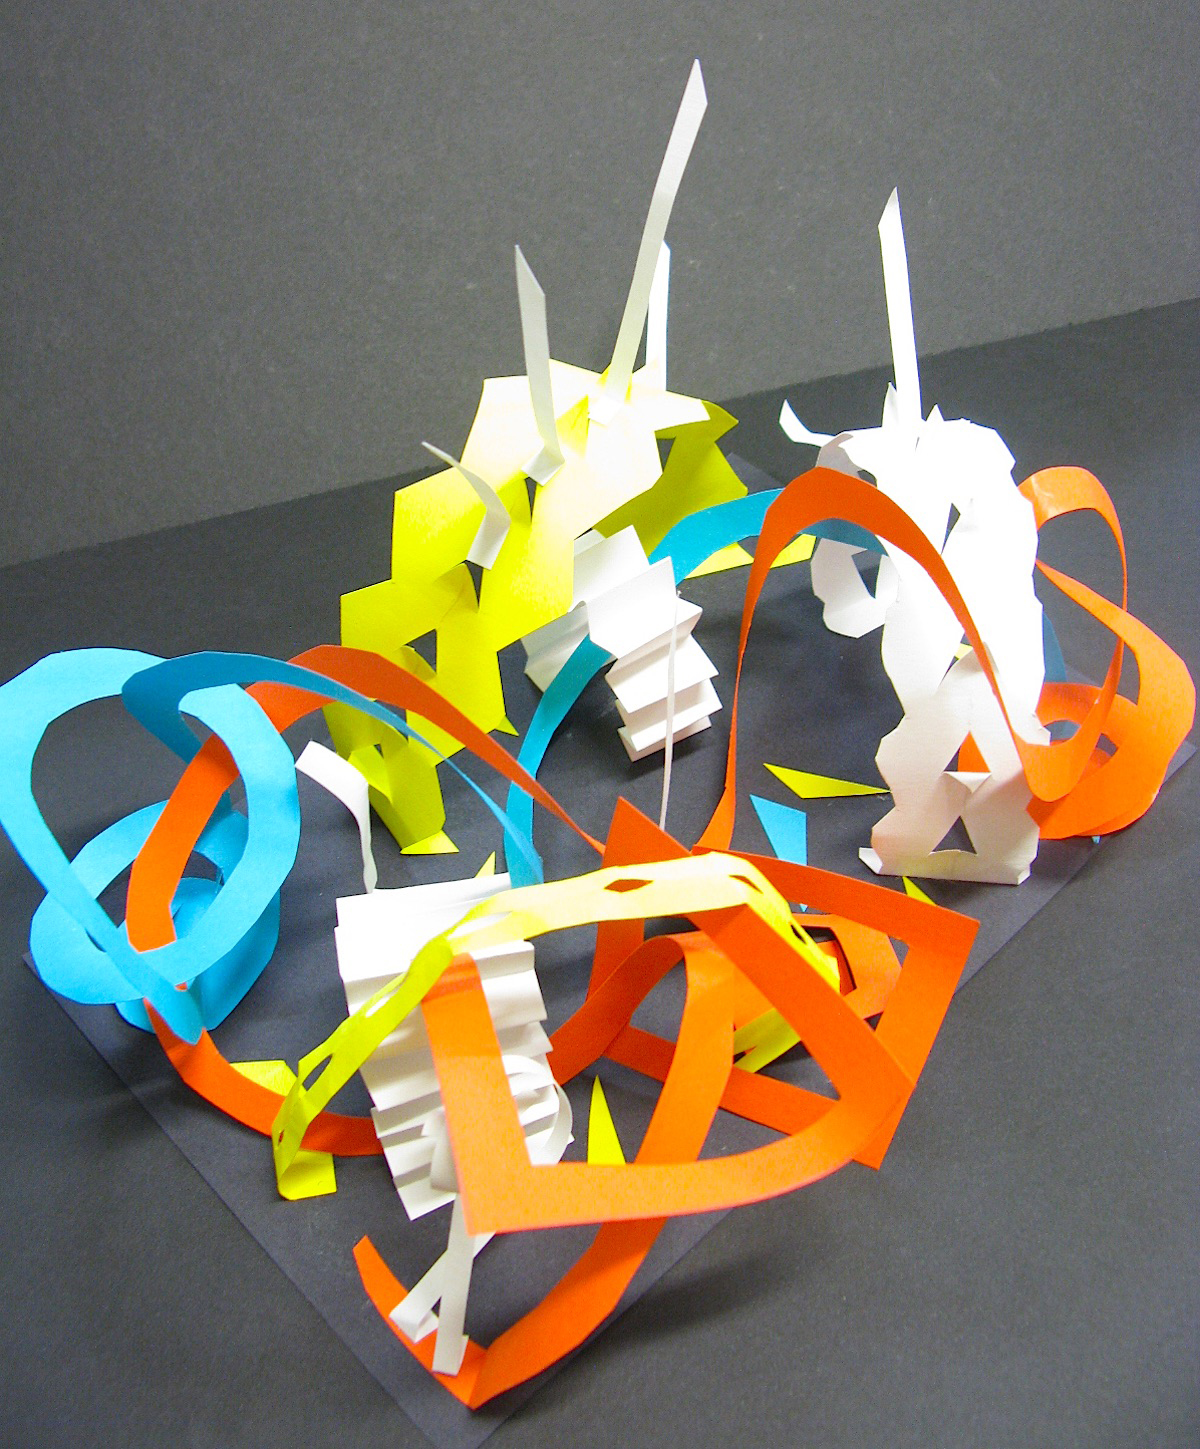 How to Make a Paper Sculpture